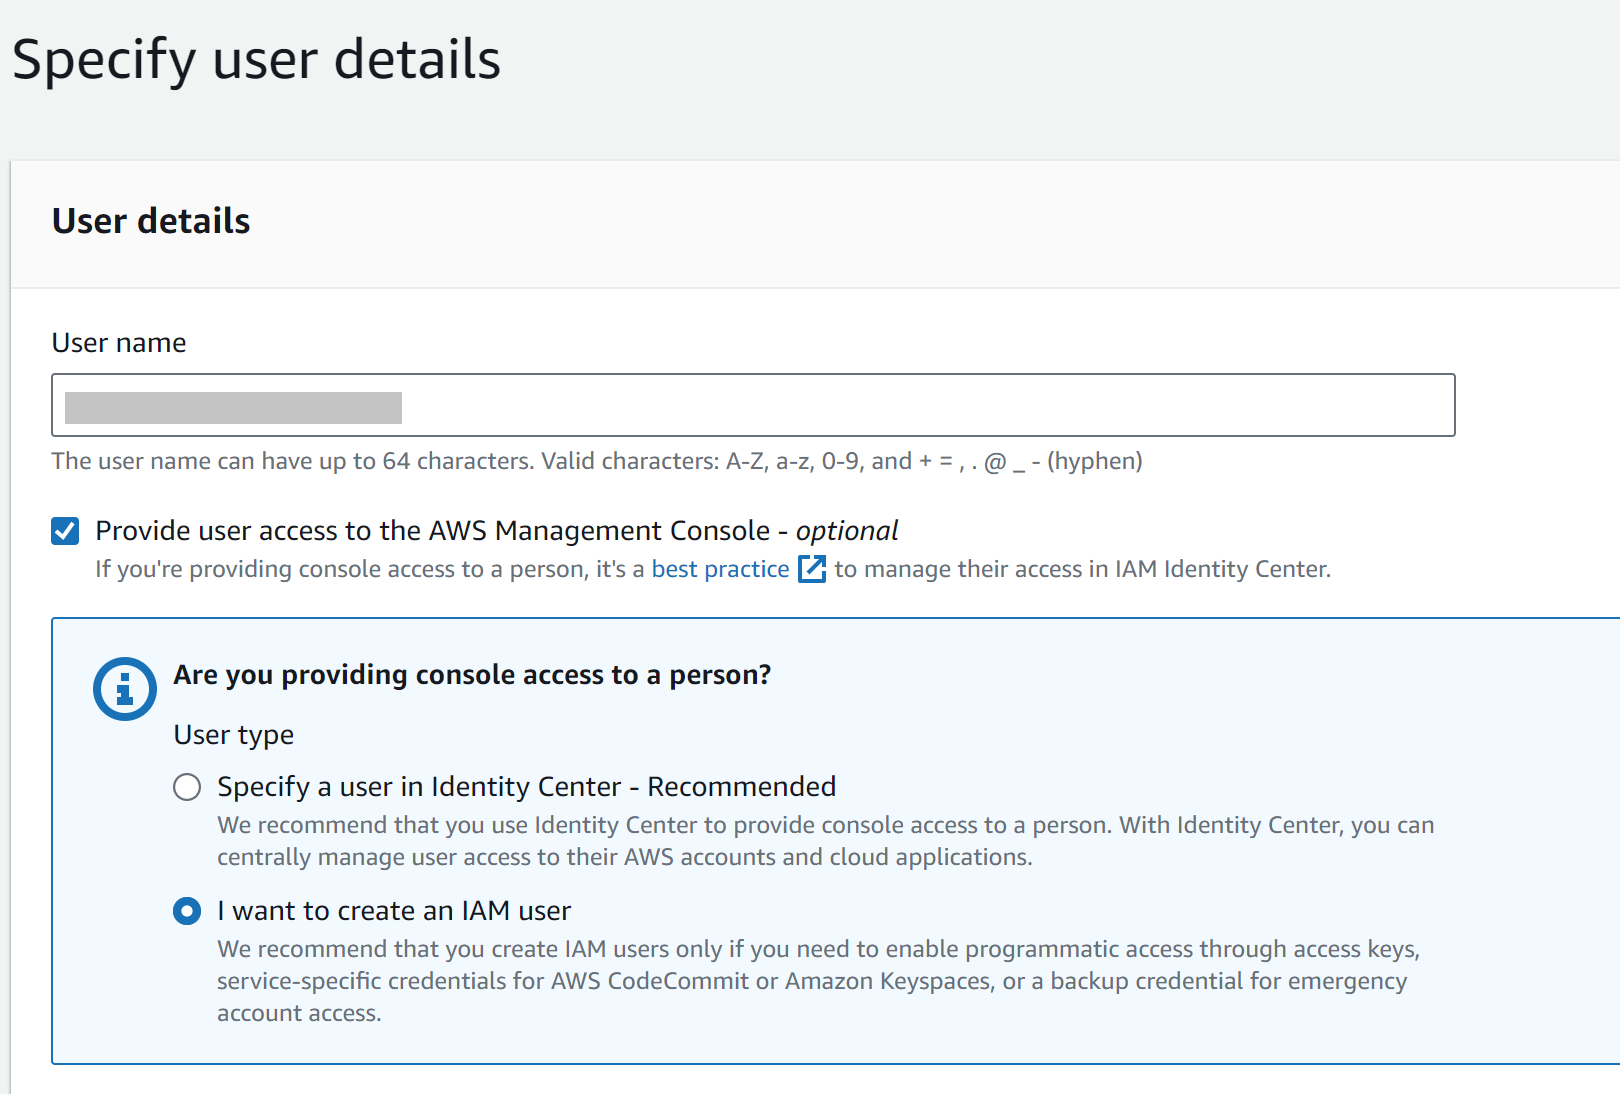 Screenshot of AWS Management Console interface for specifying user details, highlighting the ‘User name’ input field, console access options, and user type selection with radio buttons and informational icons